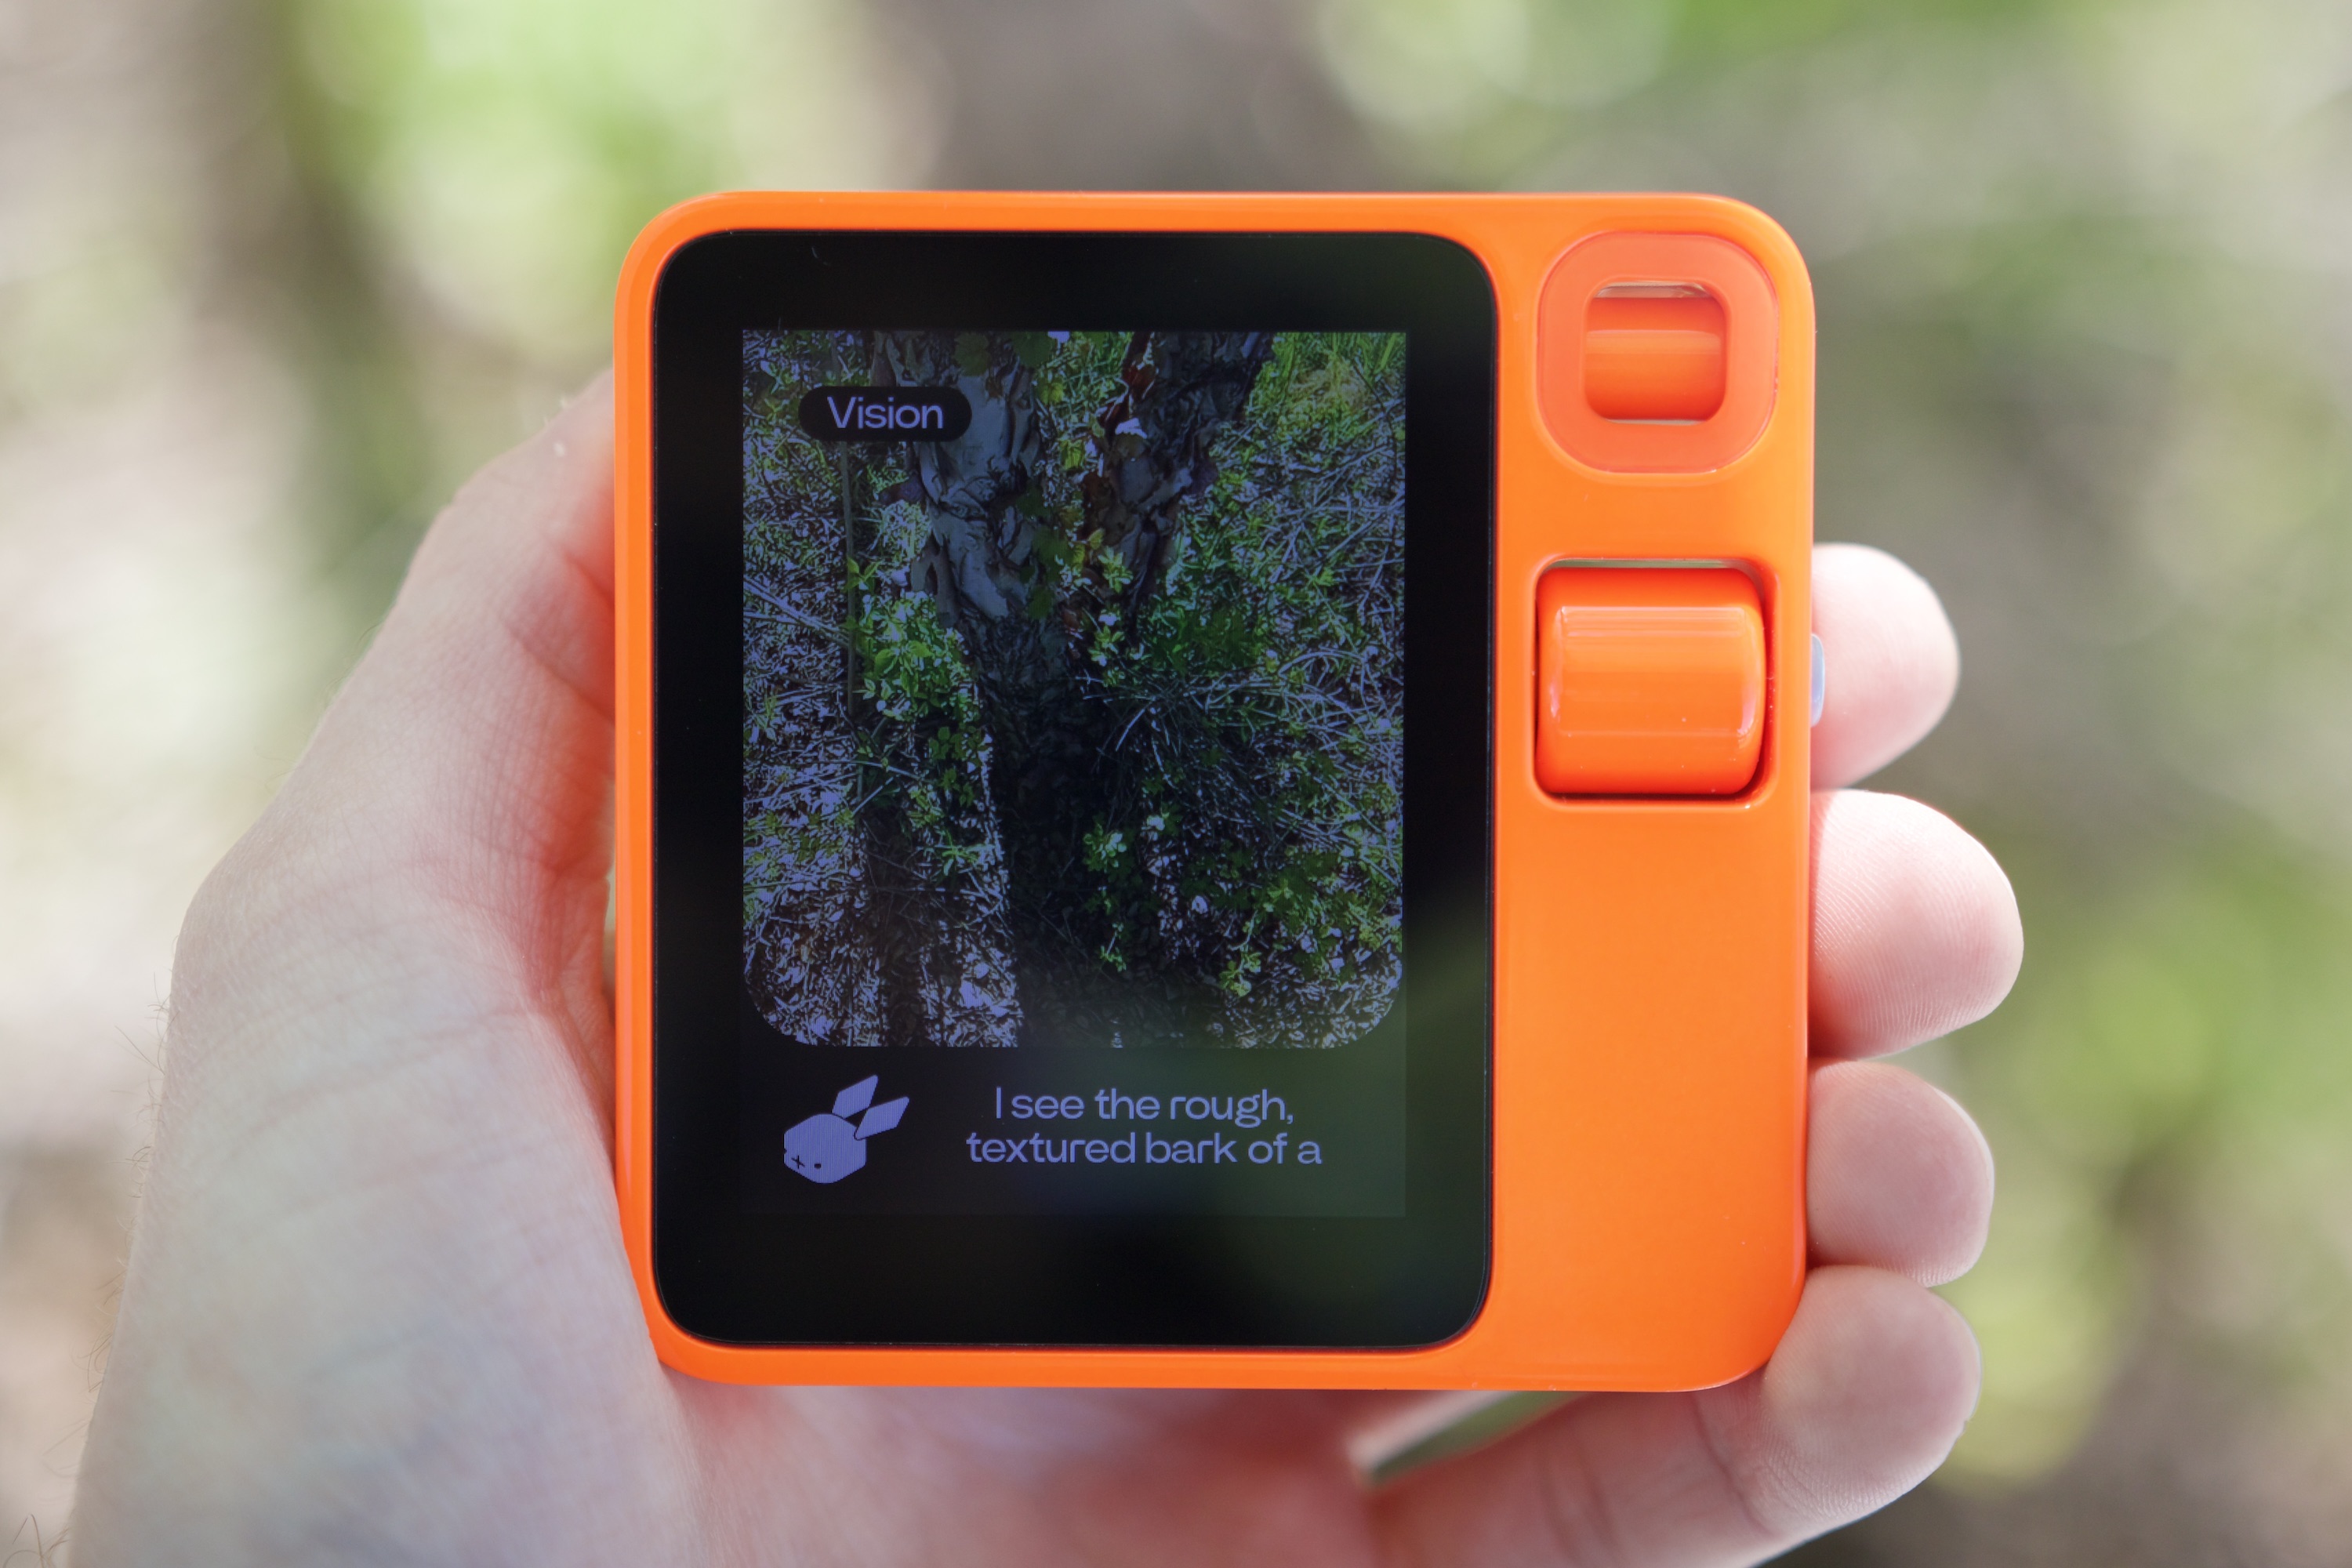 Vision mode on the Rabbit R1, identifying a nearby tree.